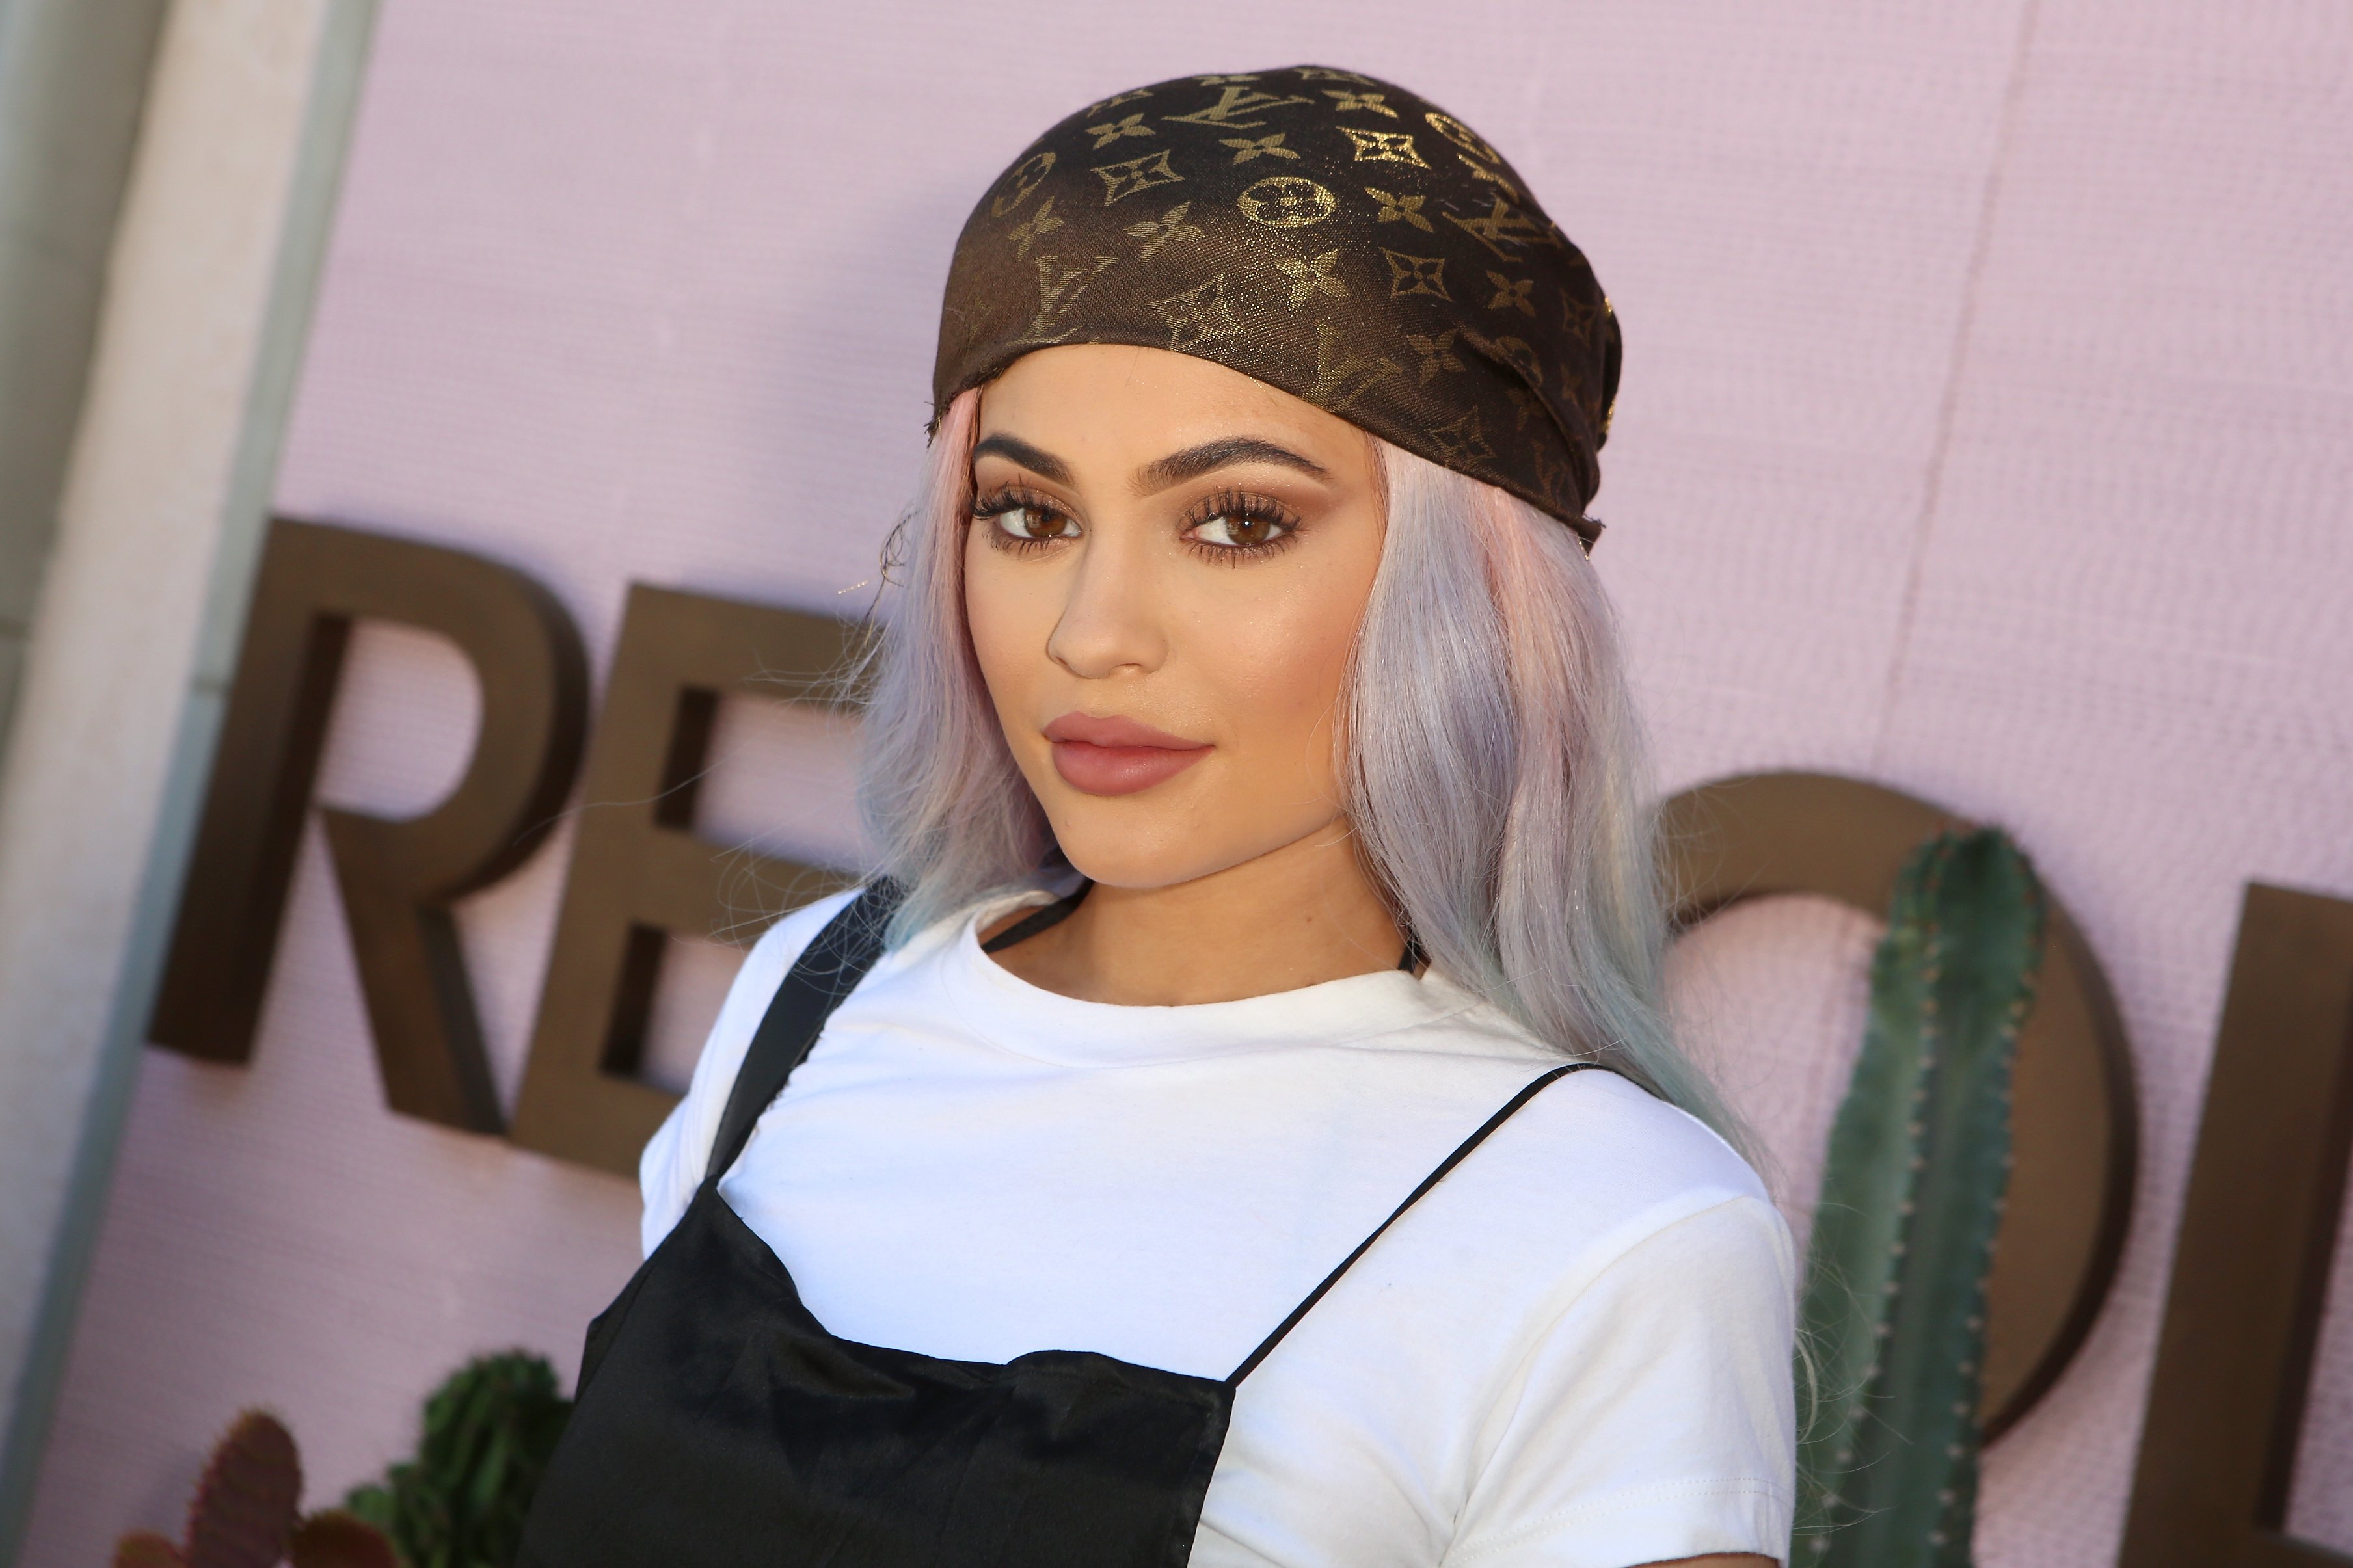  Kylie Jenner attends REVOLVE Desert House on April 17, 2016 at on April 17, 2016 in Palm Springs, California | Photo: Getty Images 